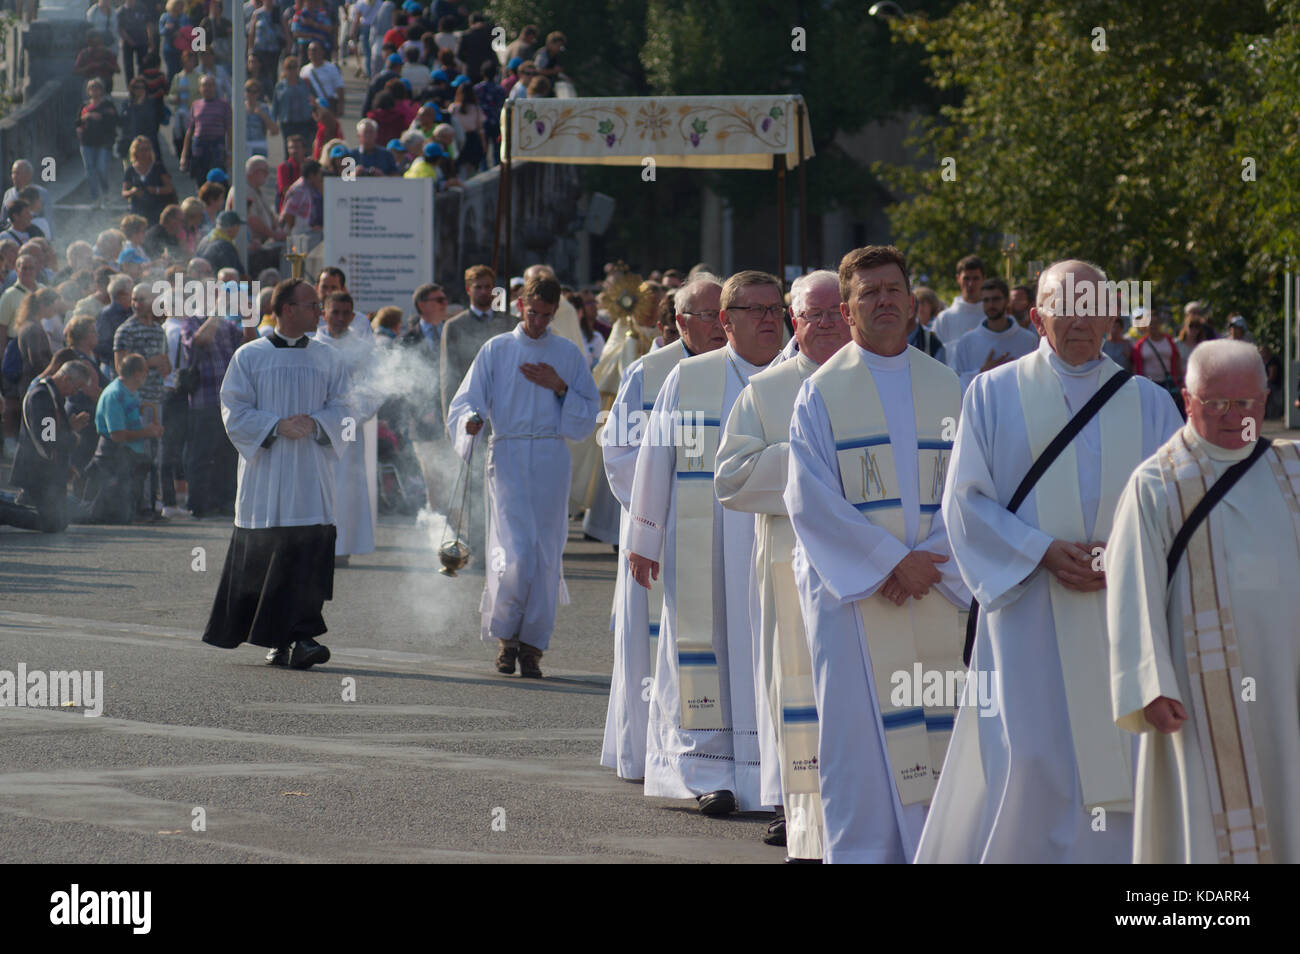 Procession of pilgrims and clergy at Lourdes, France Stock Photo